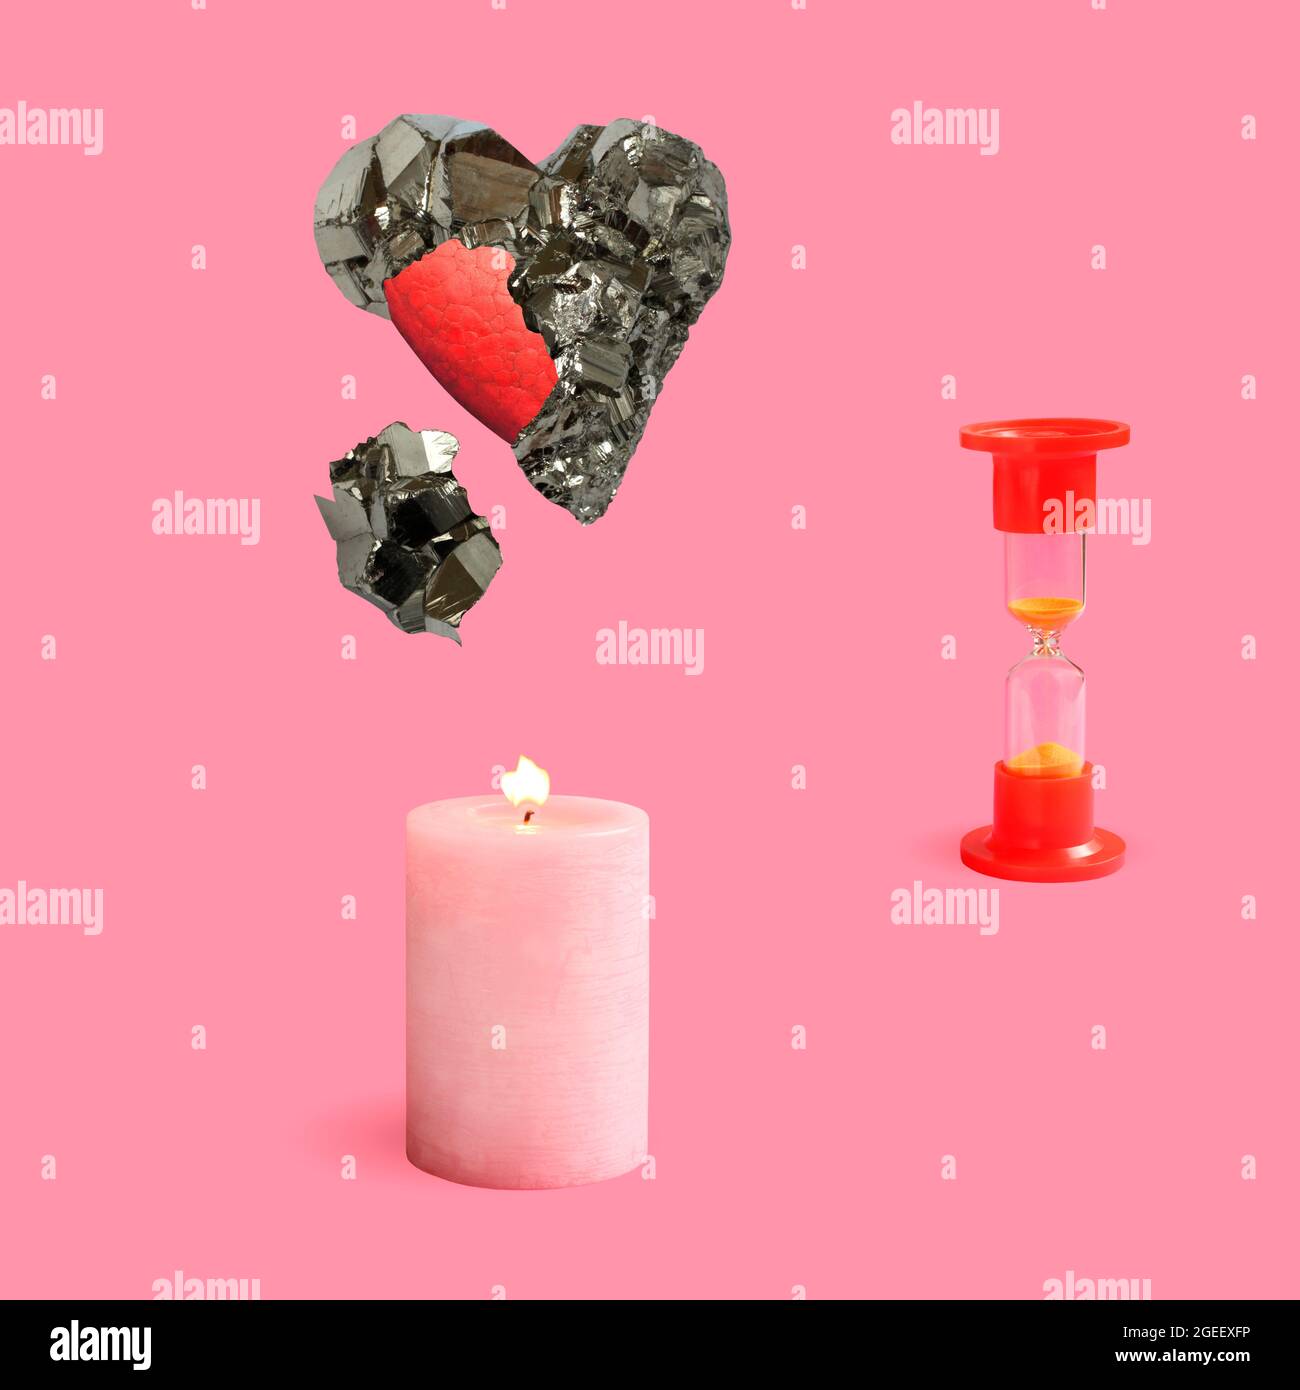 Two burning heart shaped candles and candies on a grungy background, Stock  image